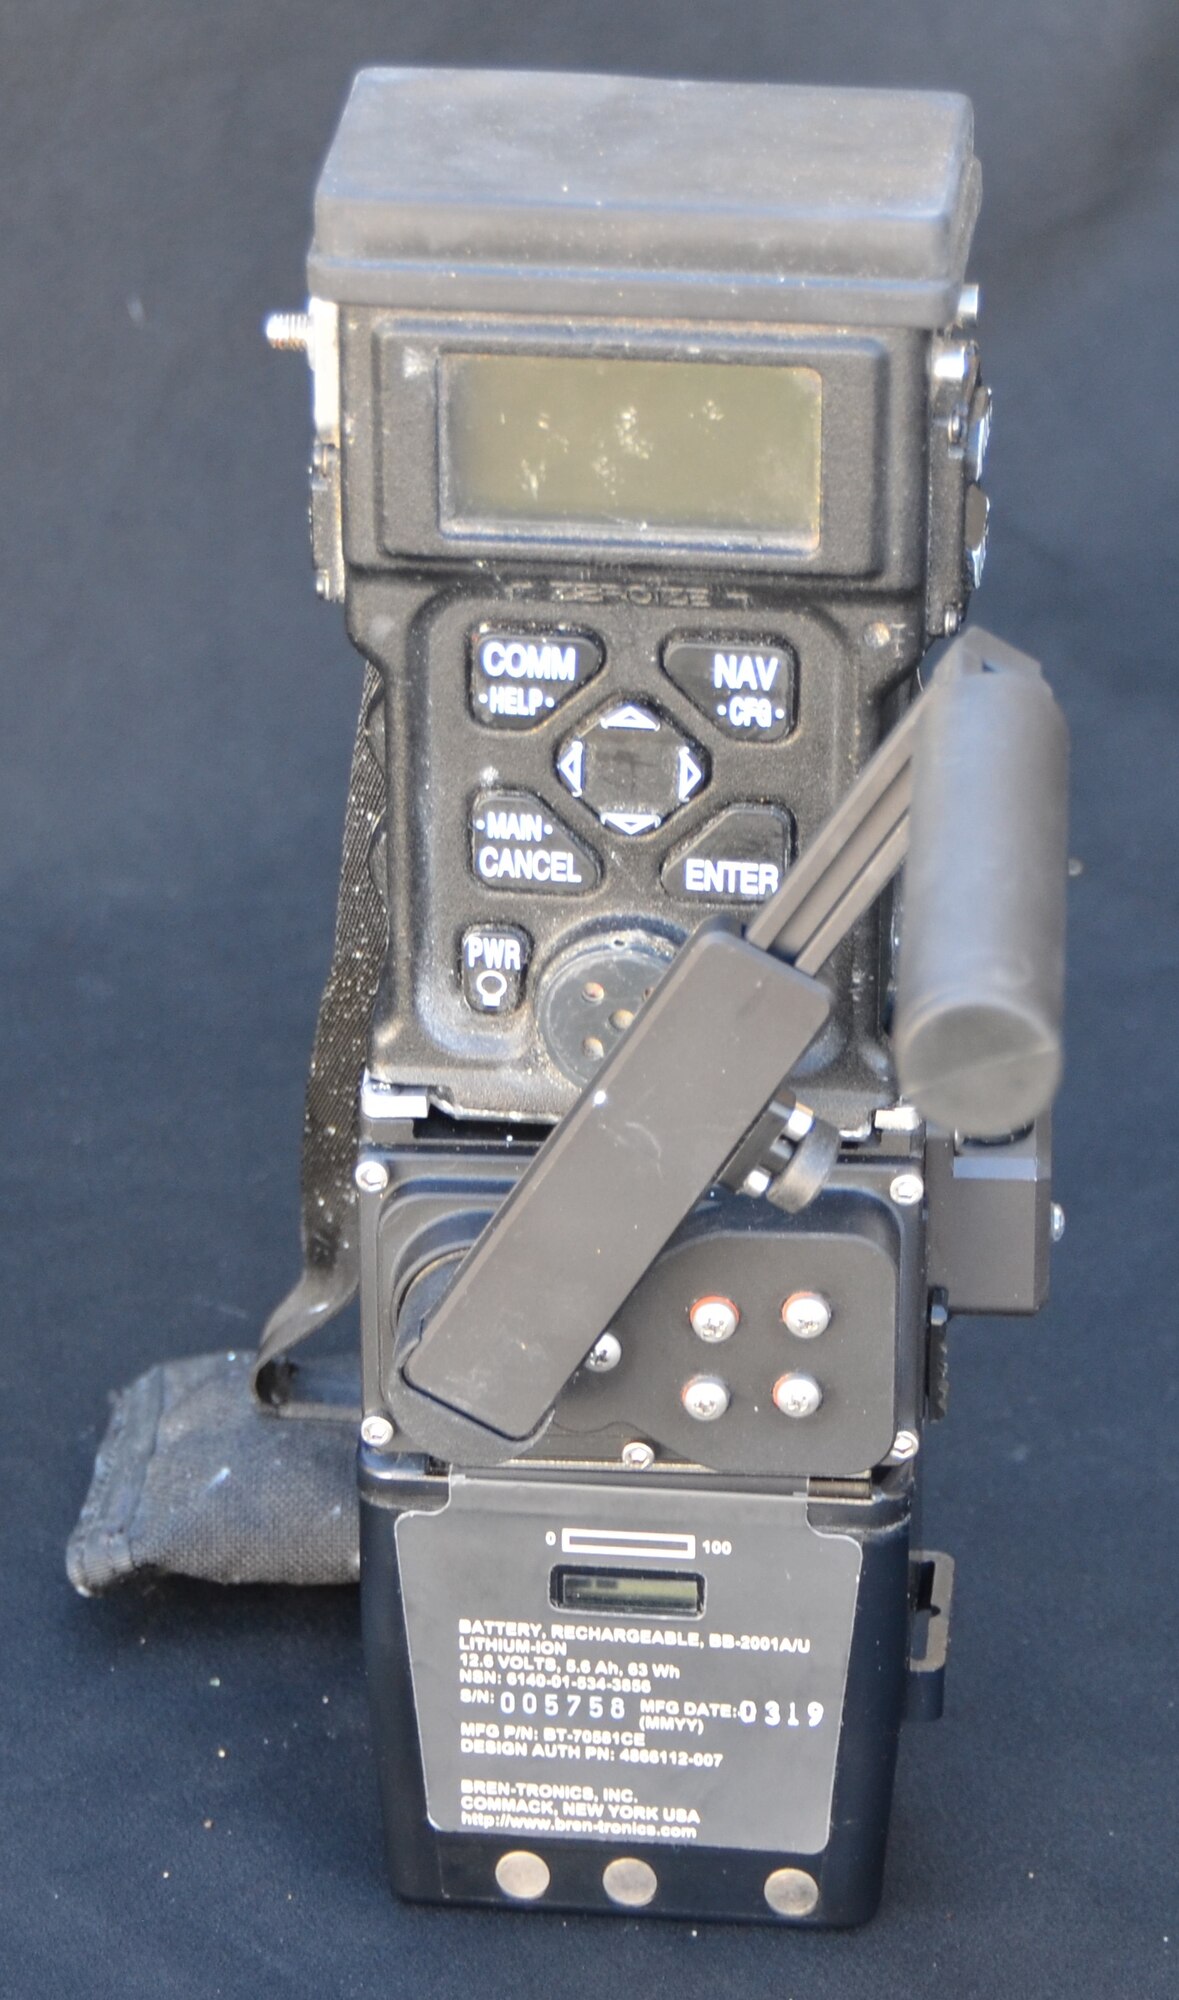 A removable hand-crank provides on-the-go power to the Surge charging device, shown here with the Combat Survivor Evader Locator radio (top) and battery (bottom) all connected. (Photo courtesy of Combat Power Solutions, LLC)